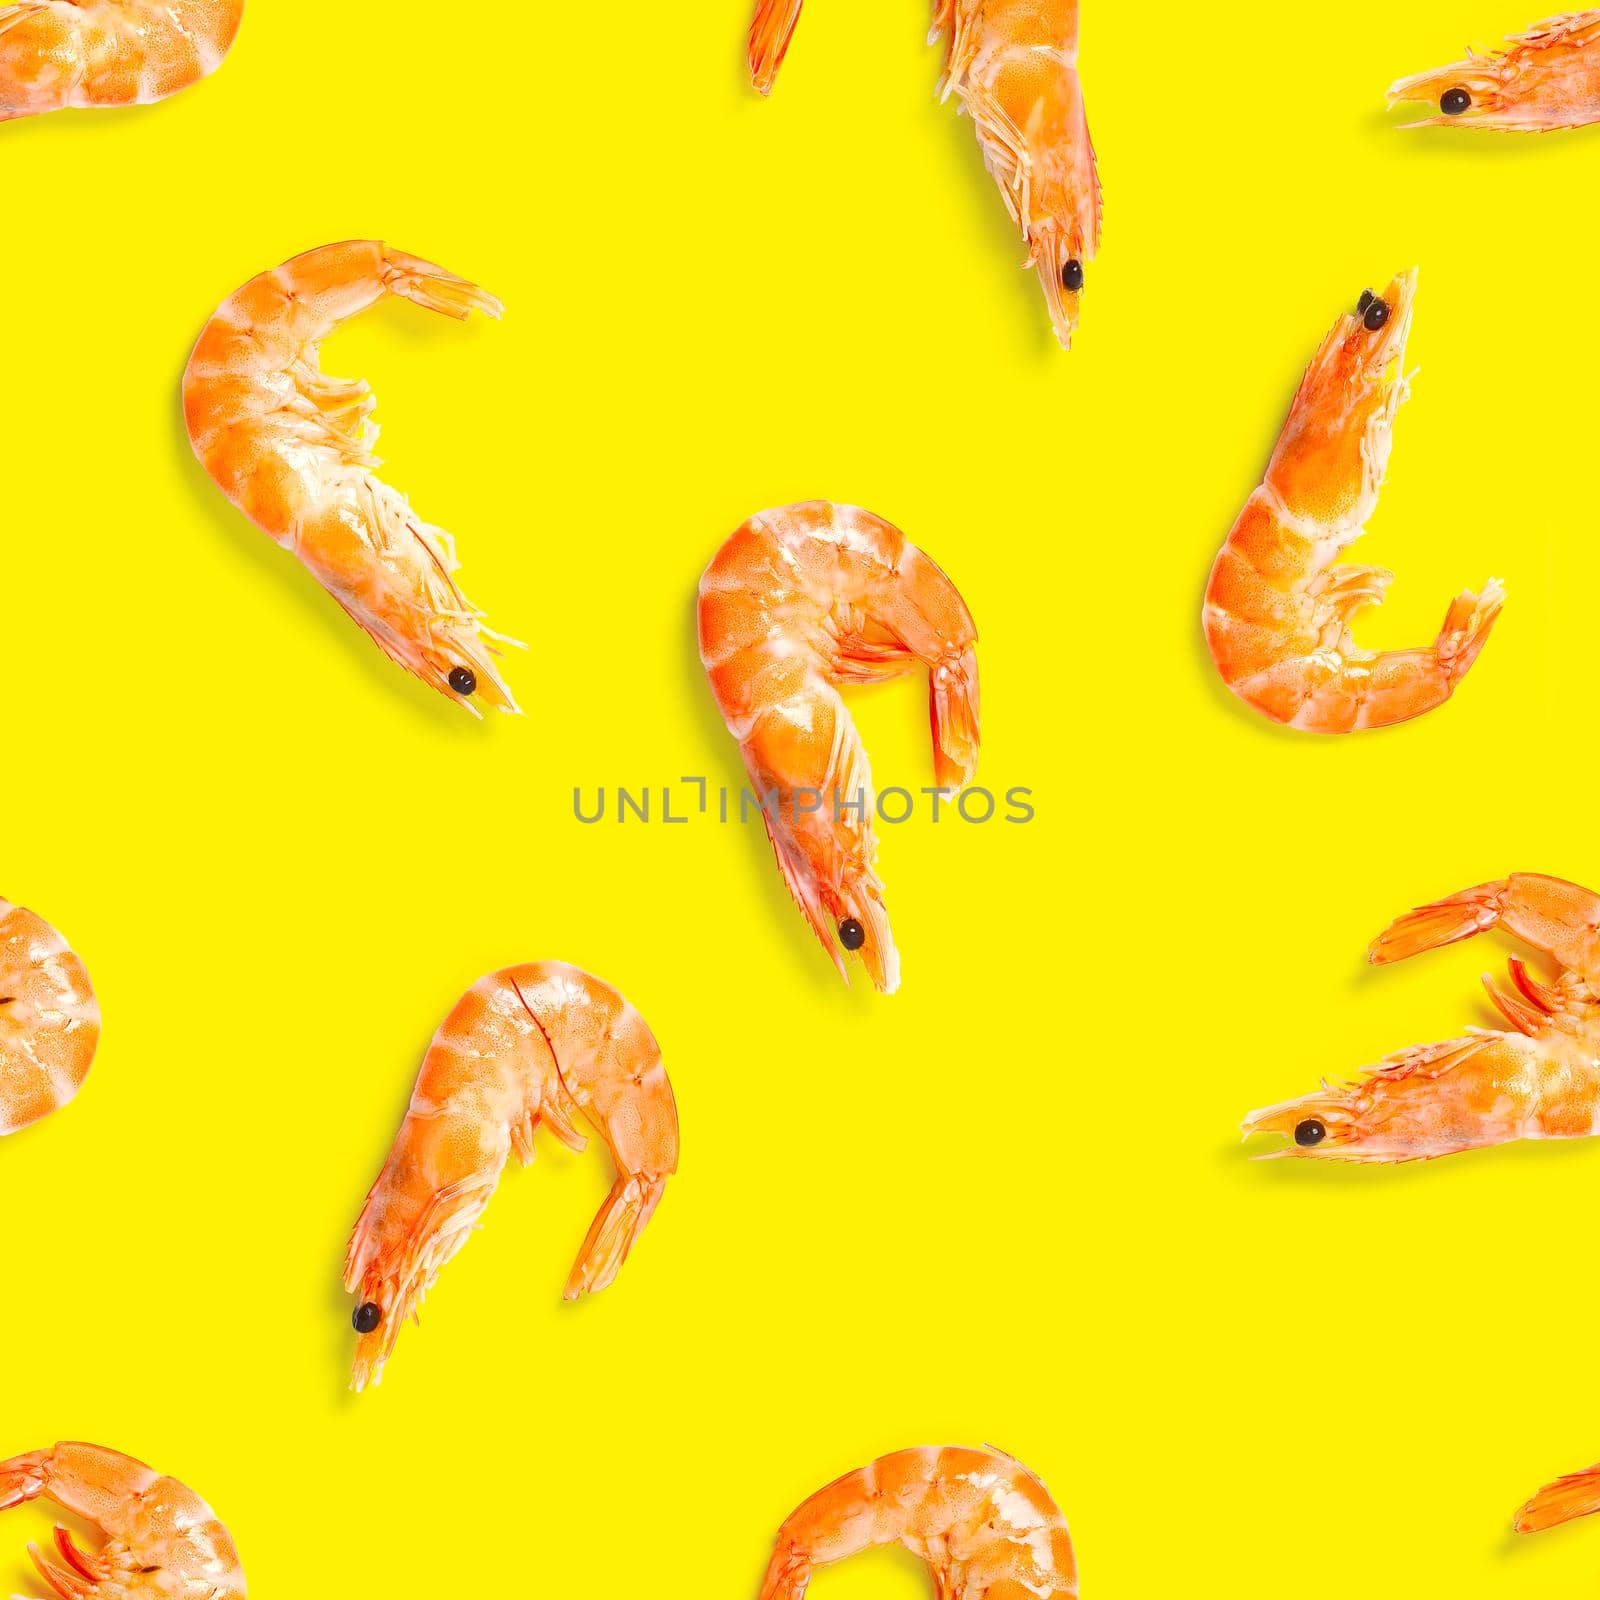 Seamless pattern made from Prawn isolated on a yellow background. Tiger shrimp. Seafood seamless pattern with shrimps. seafood pattern